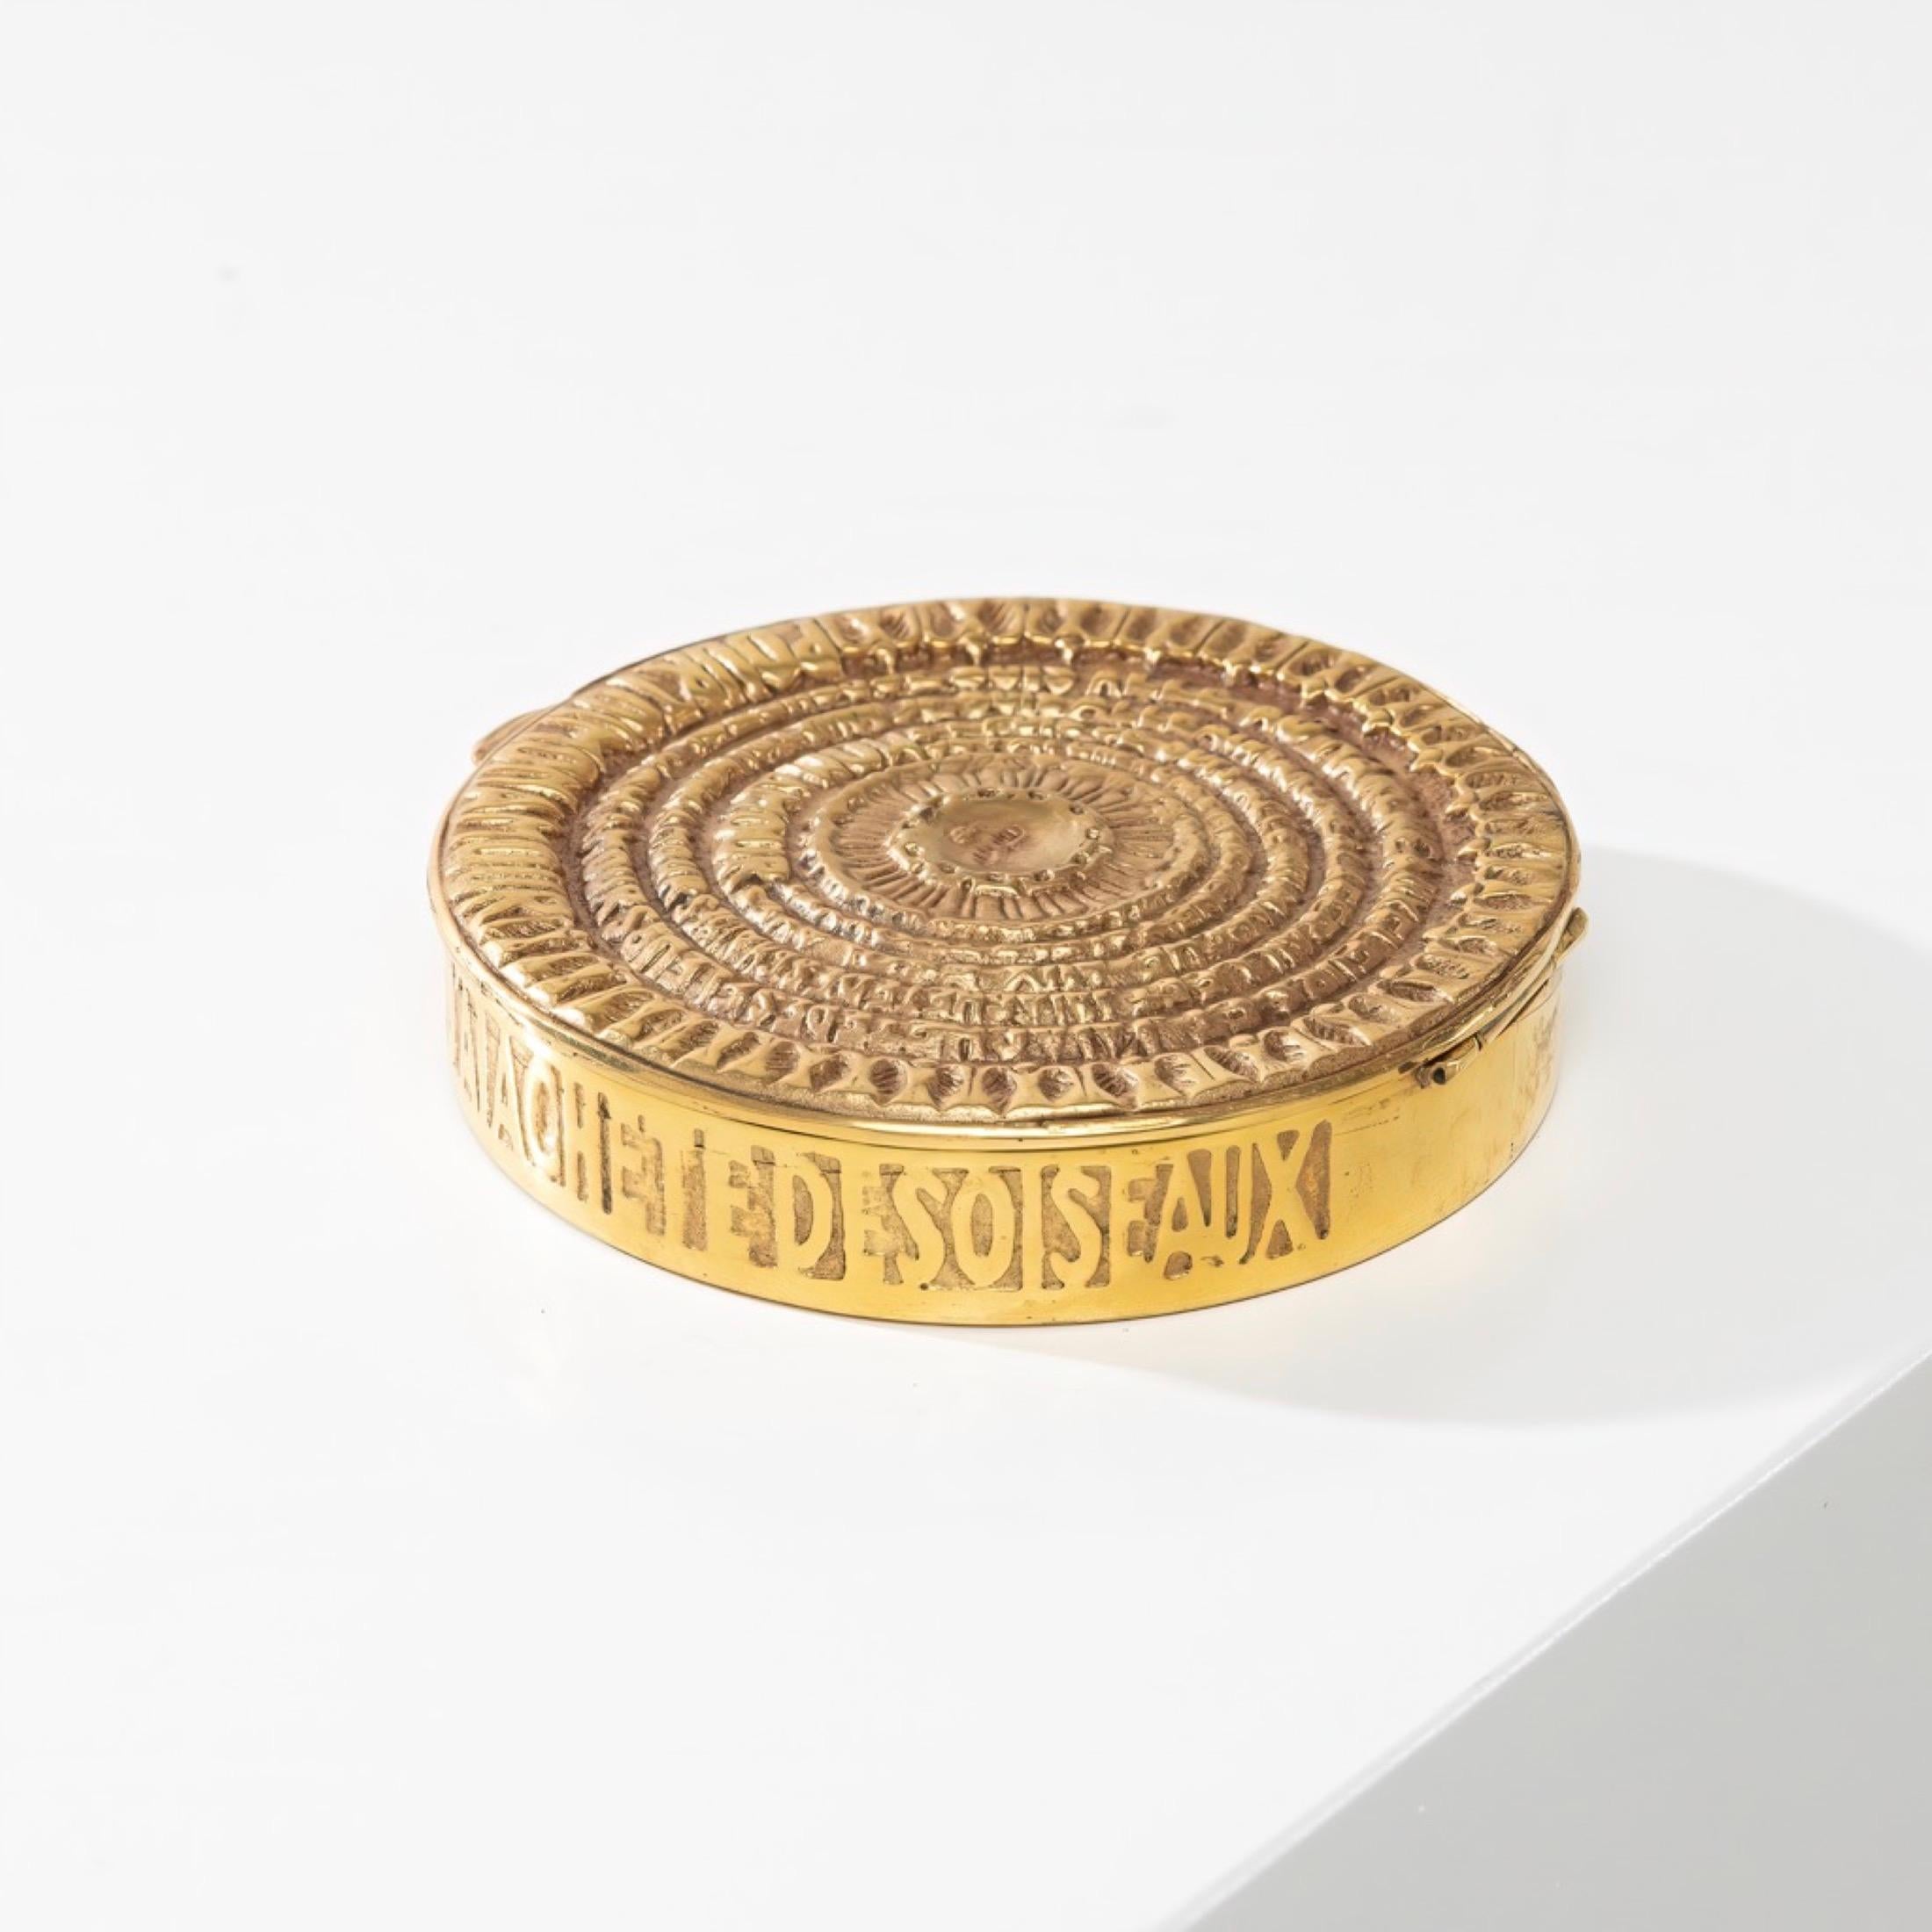 French Pour toi mon Amour (For you my love) by Line Vautrin – Gilt bronze compact